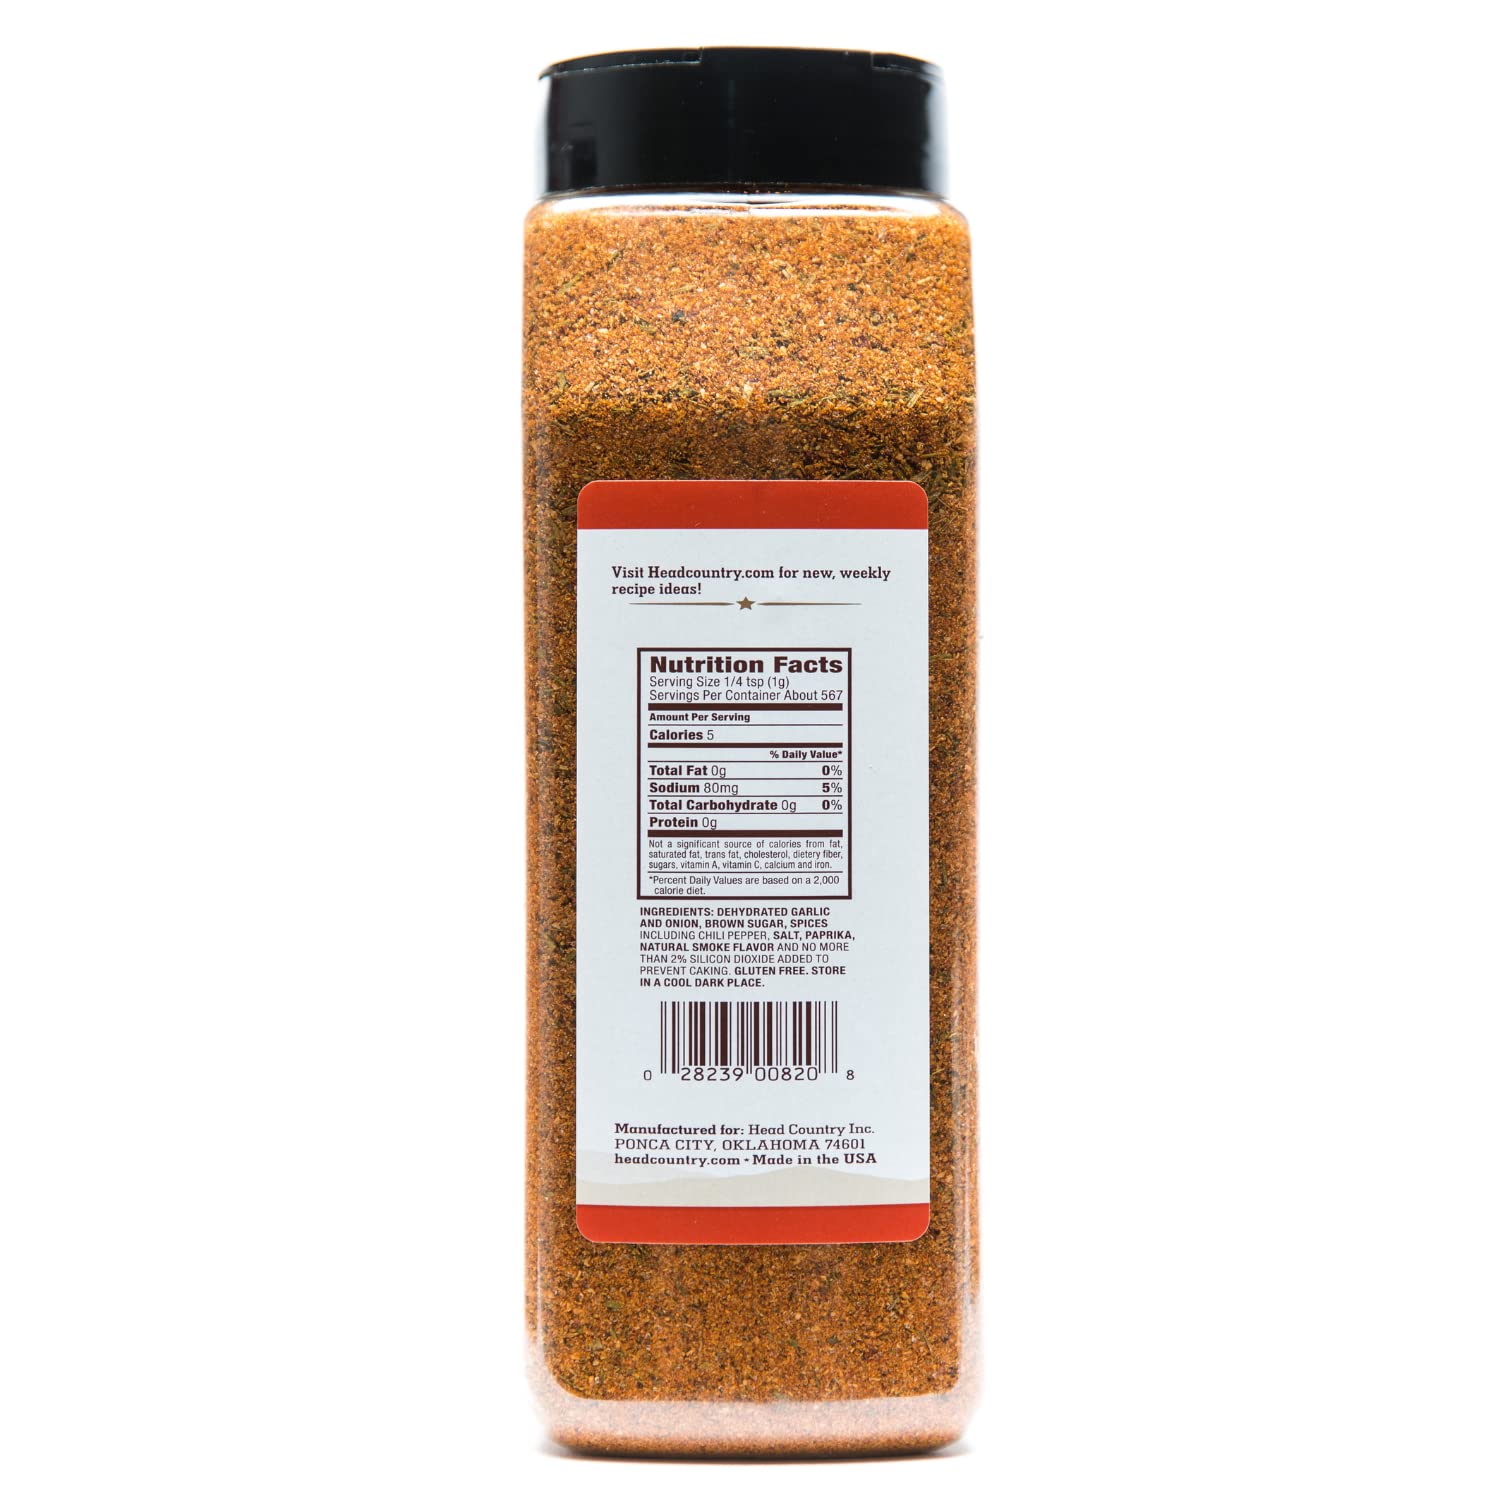 The back label of a Head Country Championship Seasoning bottle showing the nutrition facts and ingredients list. The text includes details about serving size, calories, and ingredients like dehydrated garlic and onion, brown sugar, and paprika.